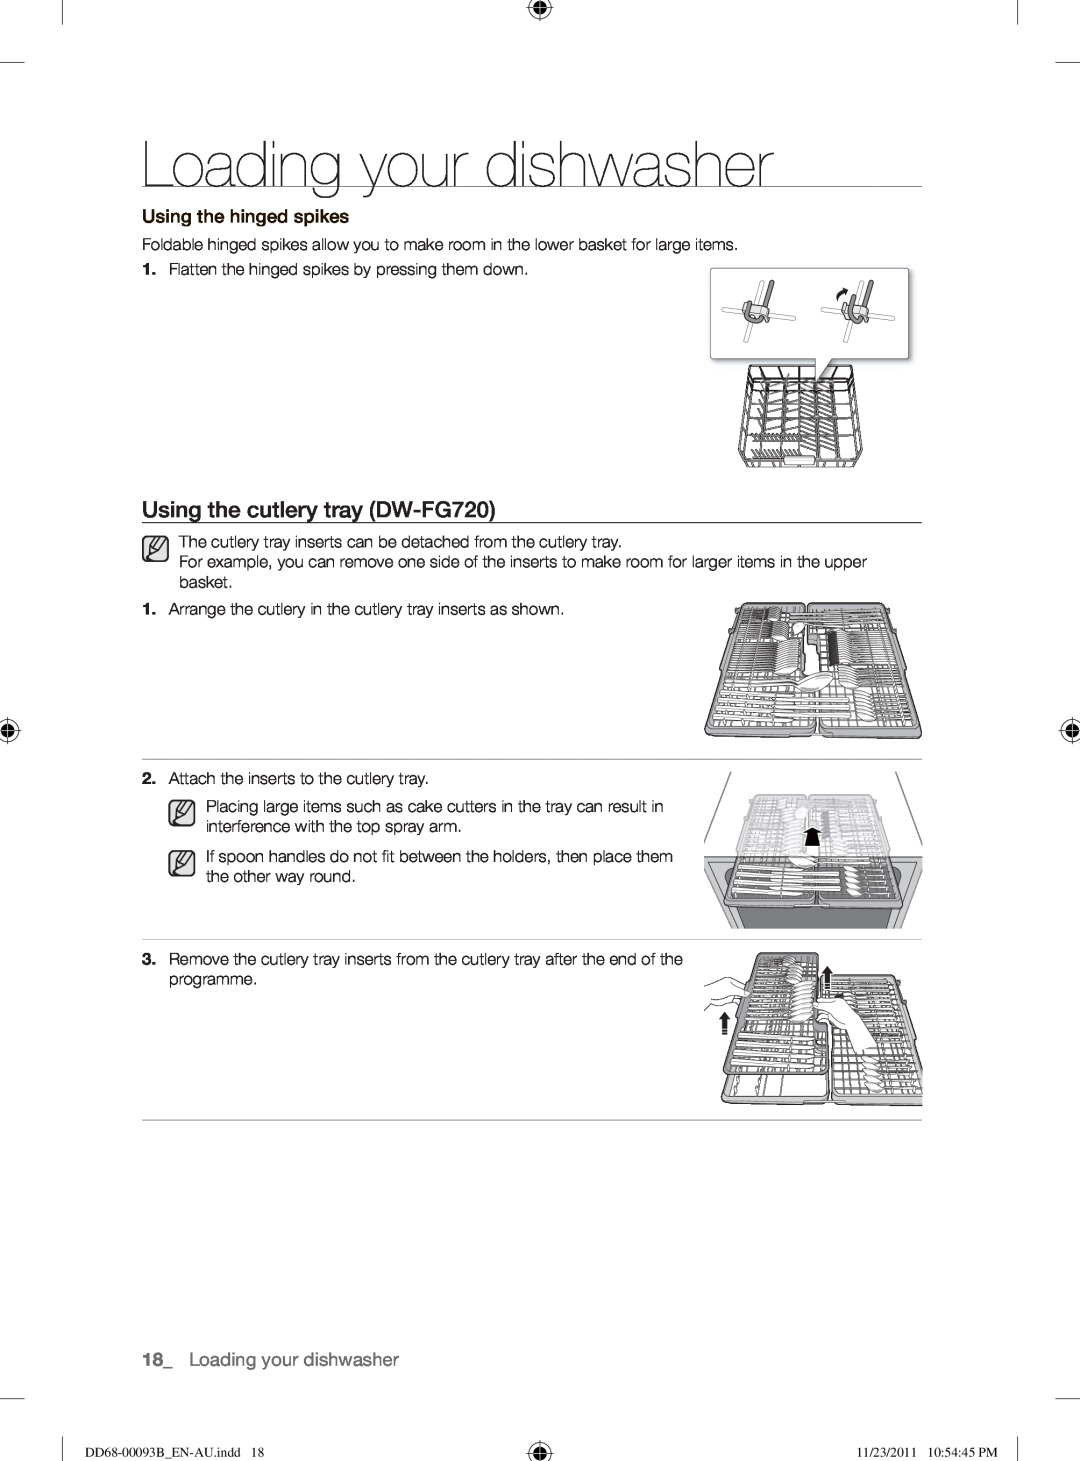 Samsung DW-FG520 user manual Using the cutlery tray DW-FG720, Using the hinged spikes, Loading your dishwasher 